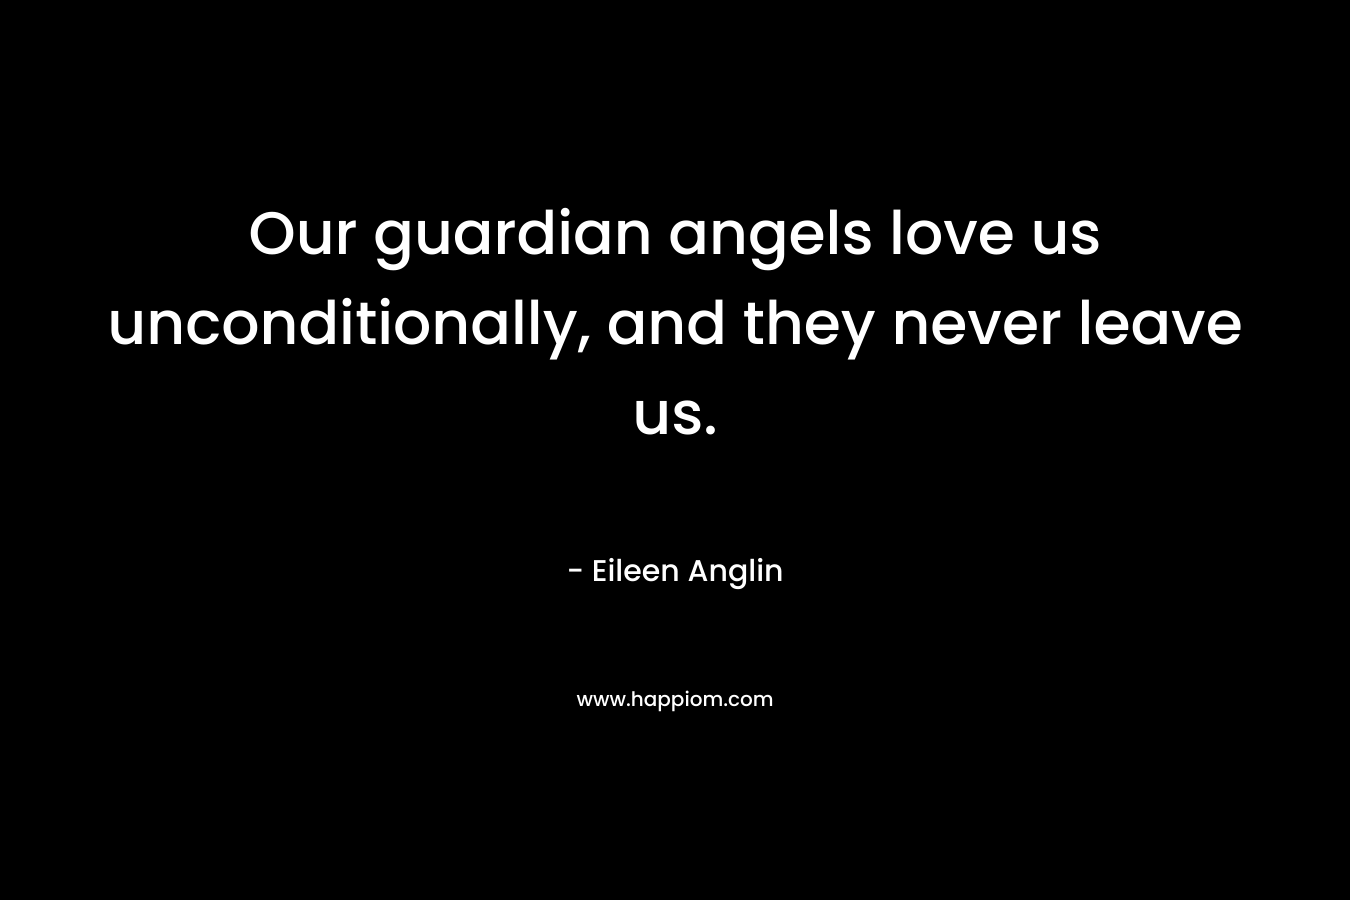 Our guardian angels love us unconditionally, and they never leave us. – Eileen Anglin